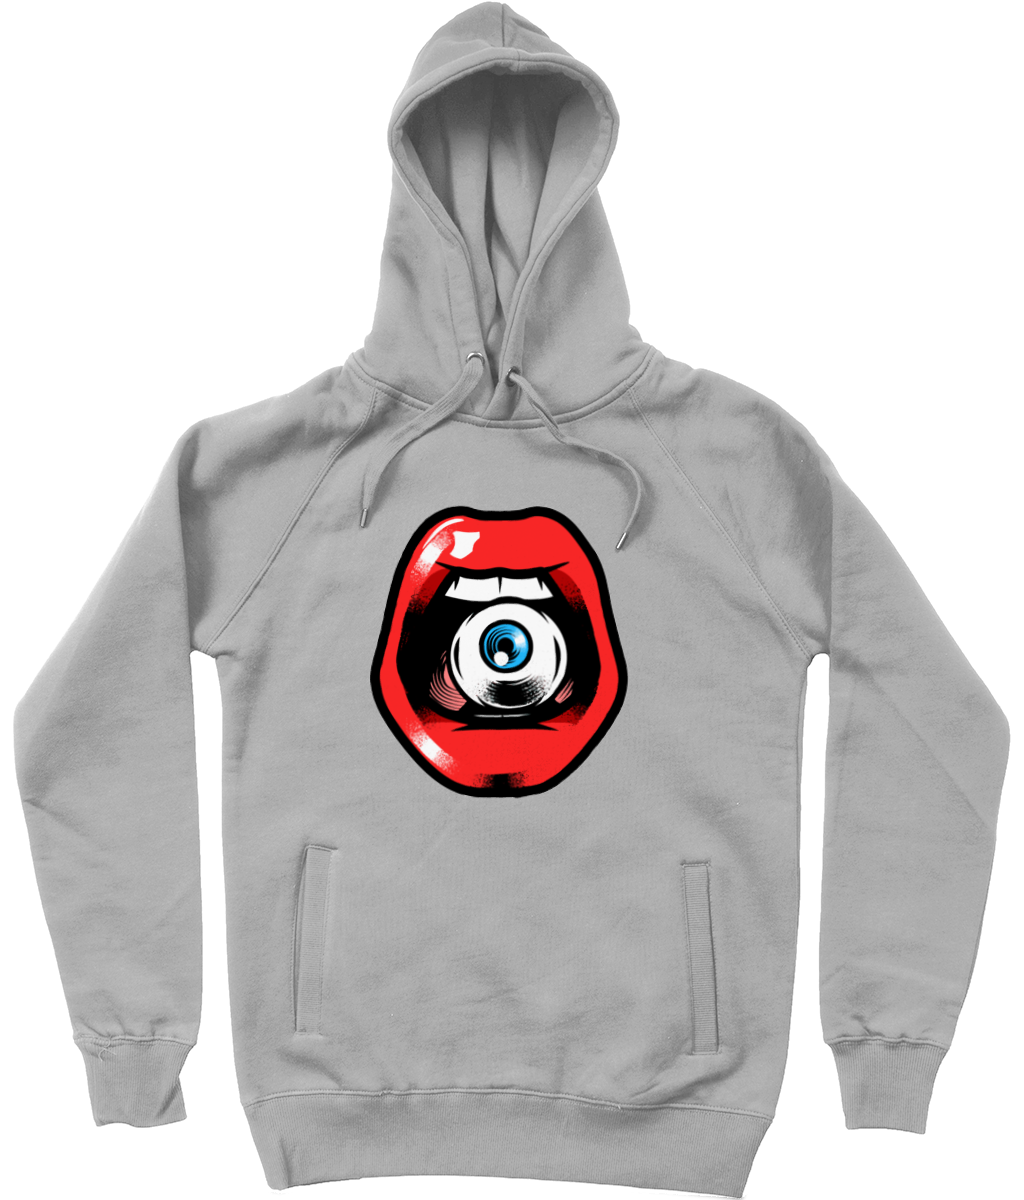 'Speak, I Can See You' Graphic Eye in Mouth Trendy Unisex Pullover Hoodie